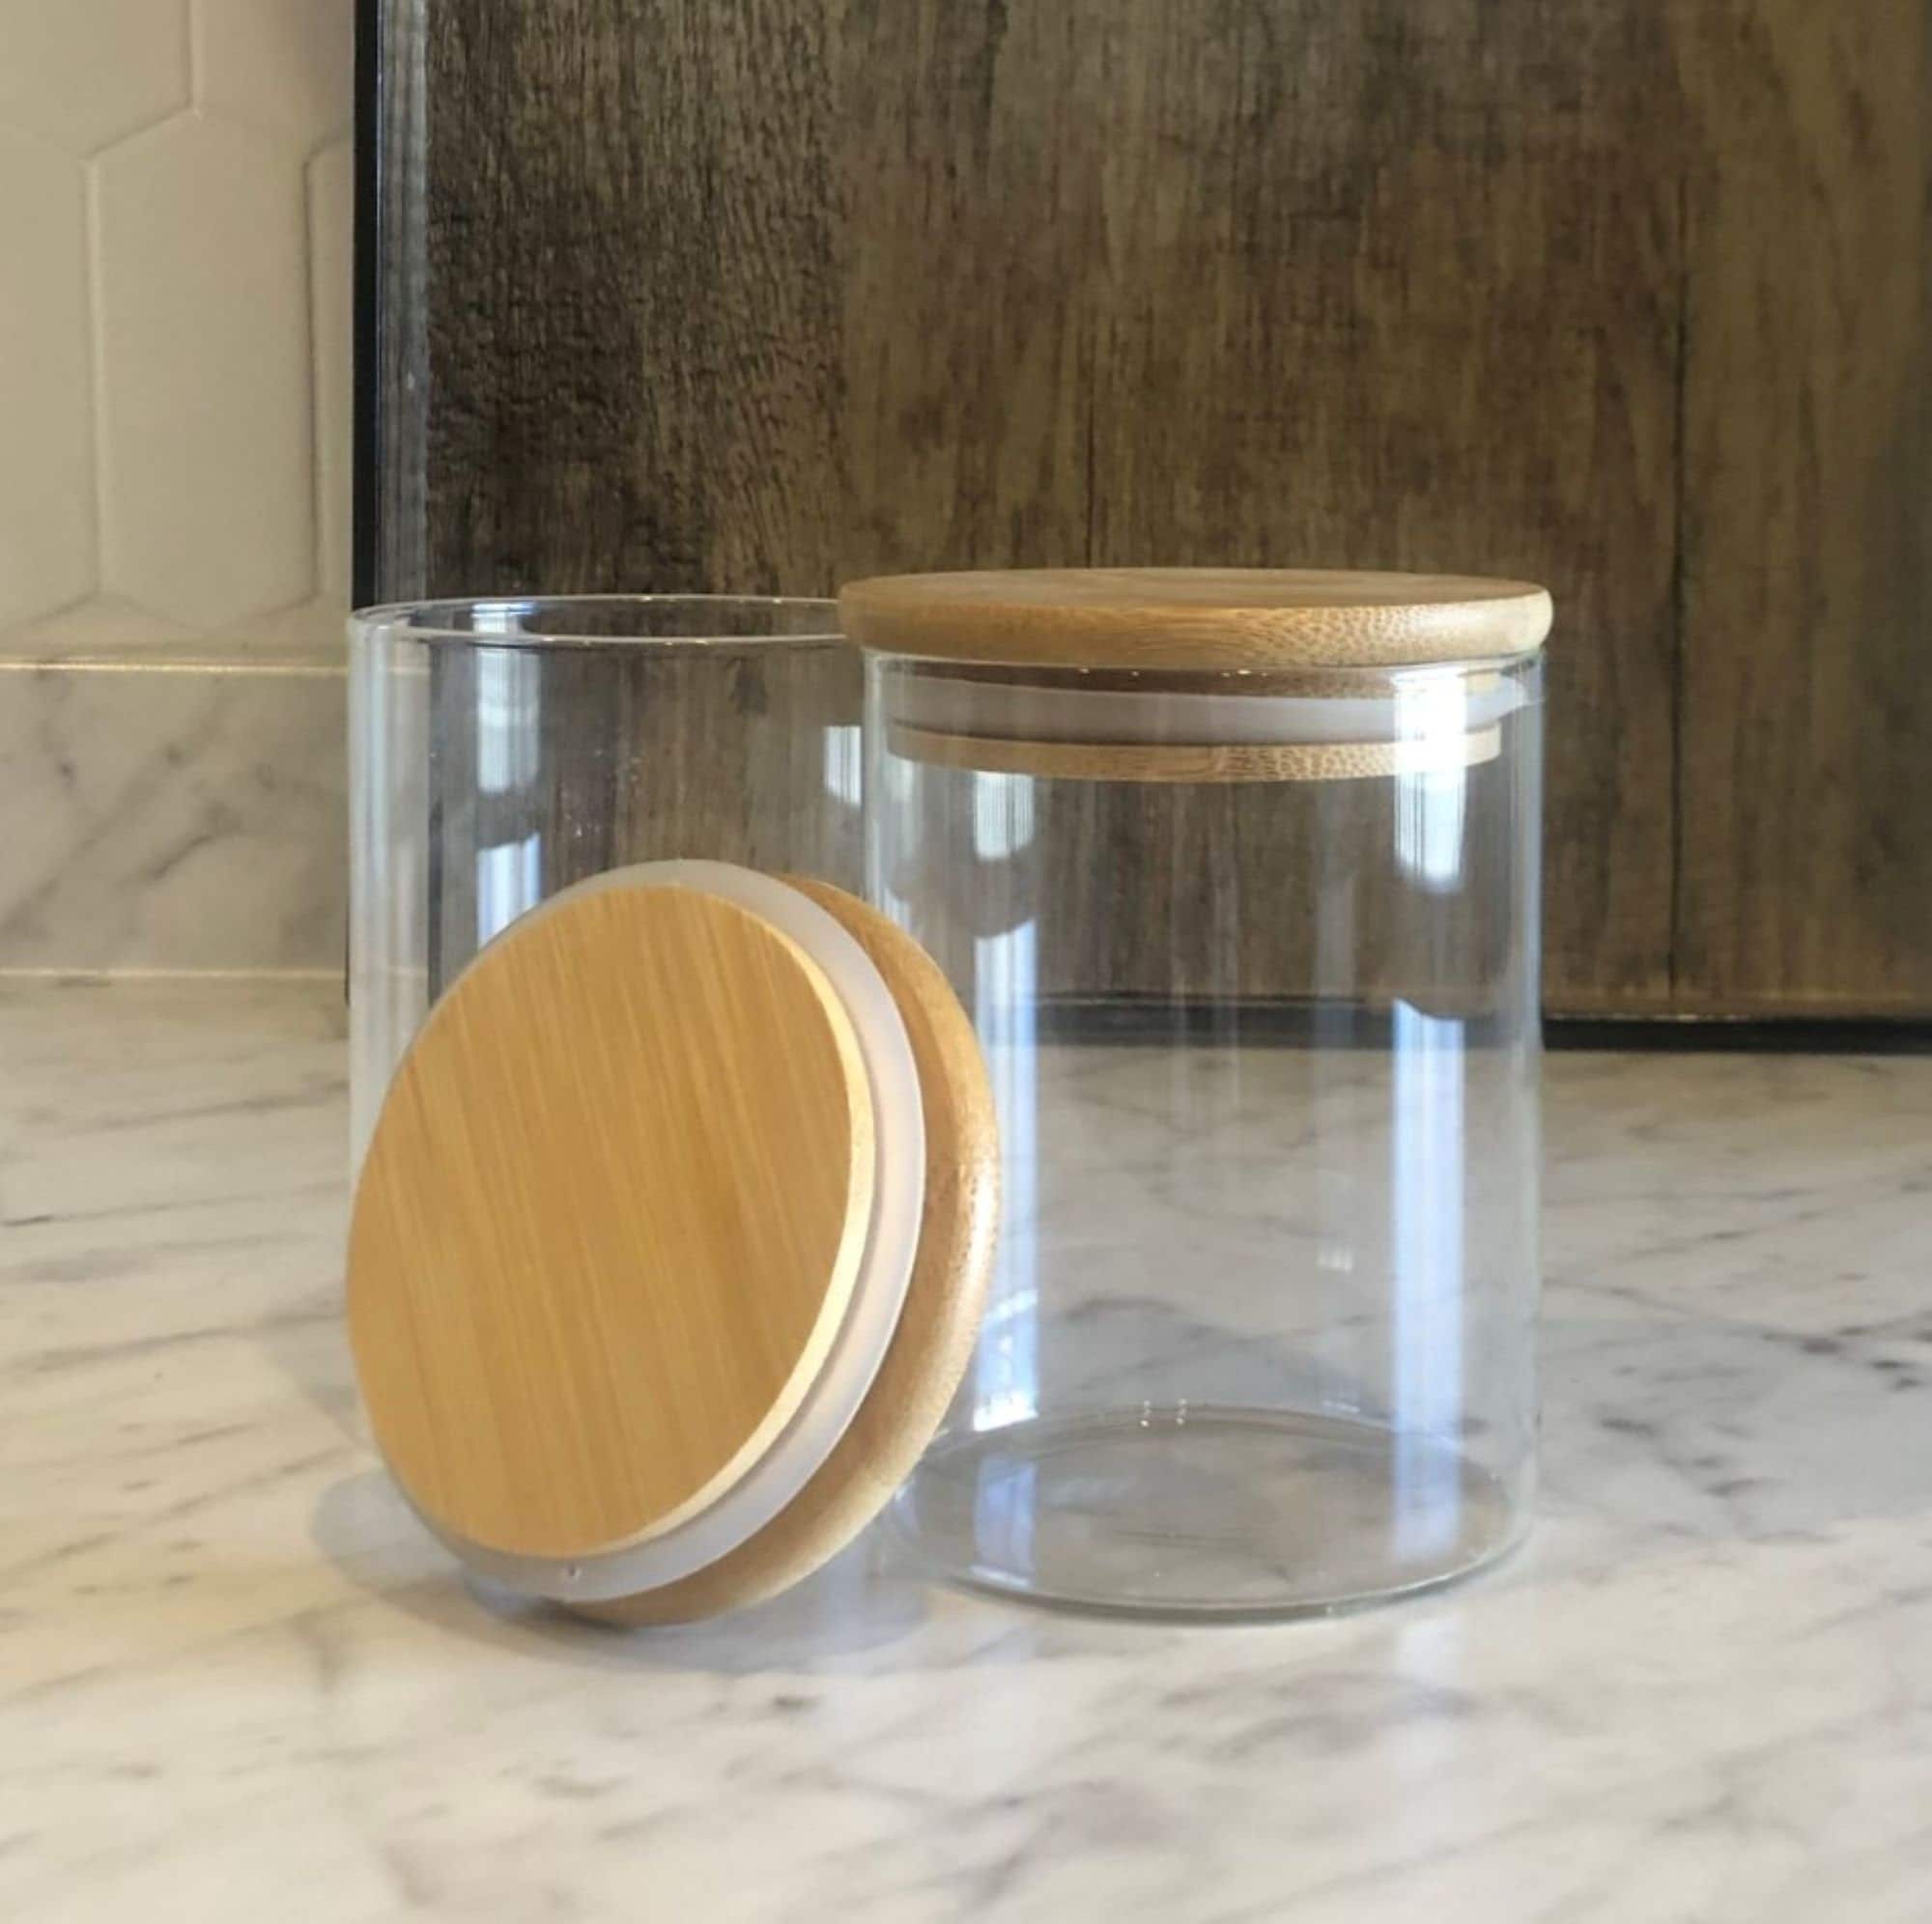 2 Oz. Glass Spice Jars With Bamboo Lid Eco Kitchen Collection Glass Spice  Jars Airtight 60ml Spice Jar 